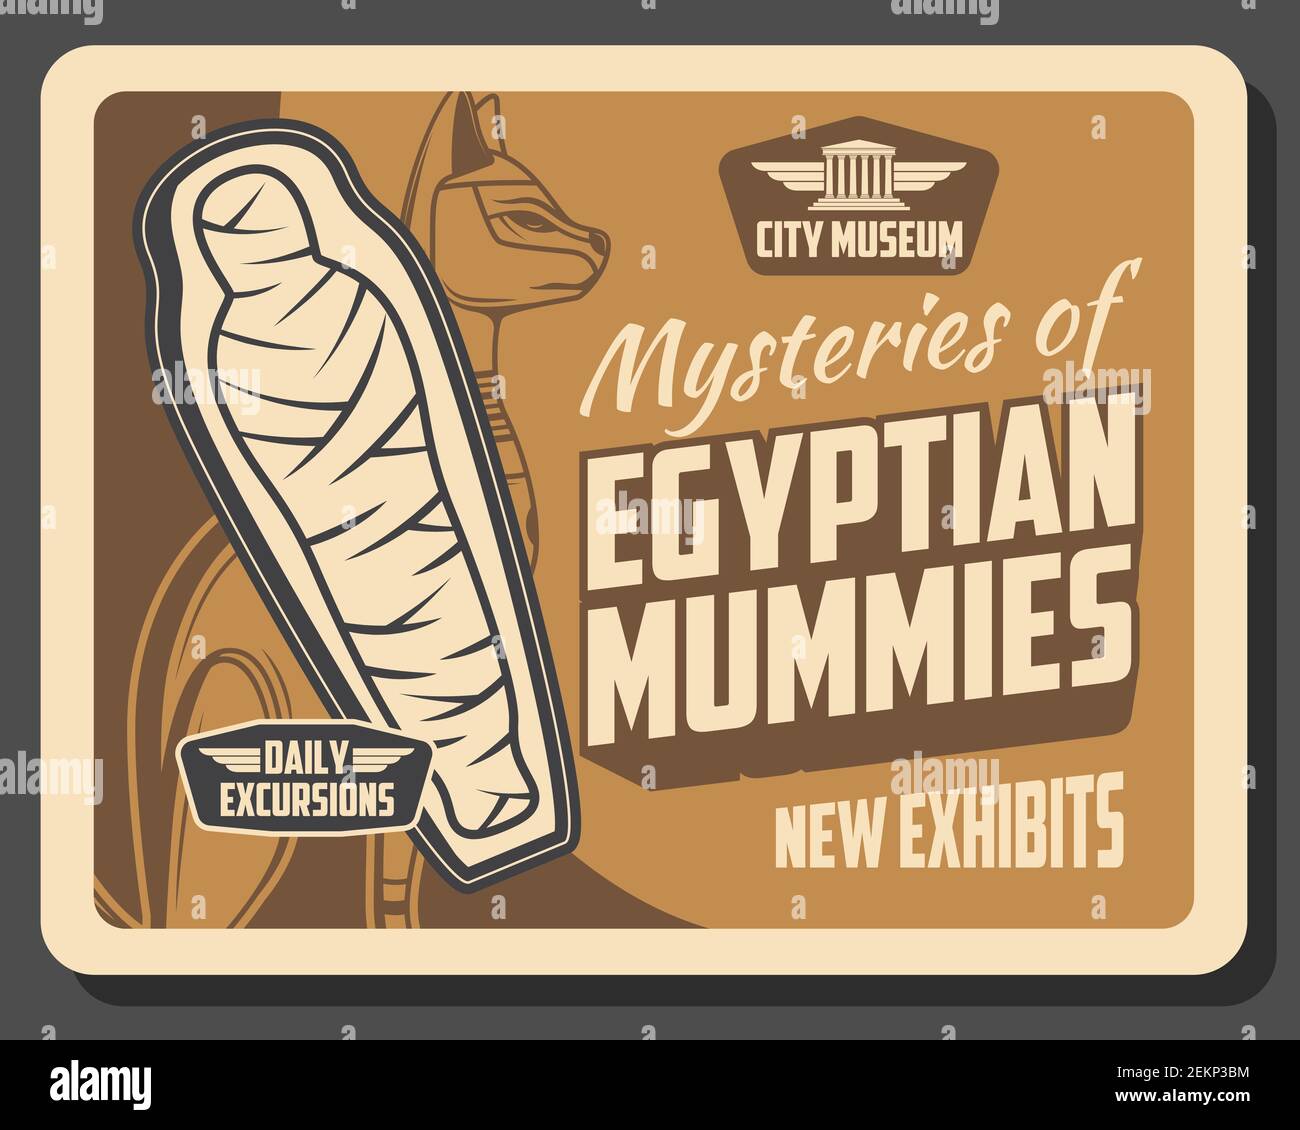 Egyptian mummies exhibition in museum, ancient Egypt history. Vector cat deity and exhibits of deceased human, mysteries of prehistoric times. City mu Stock Vector